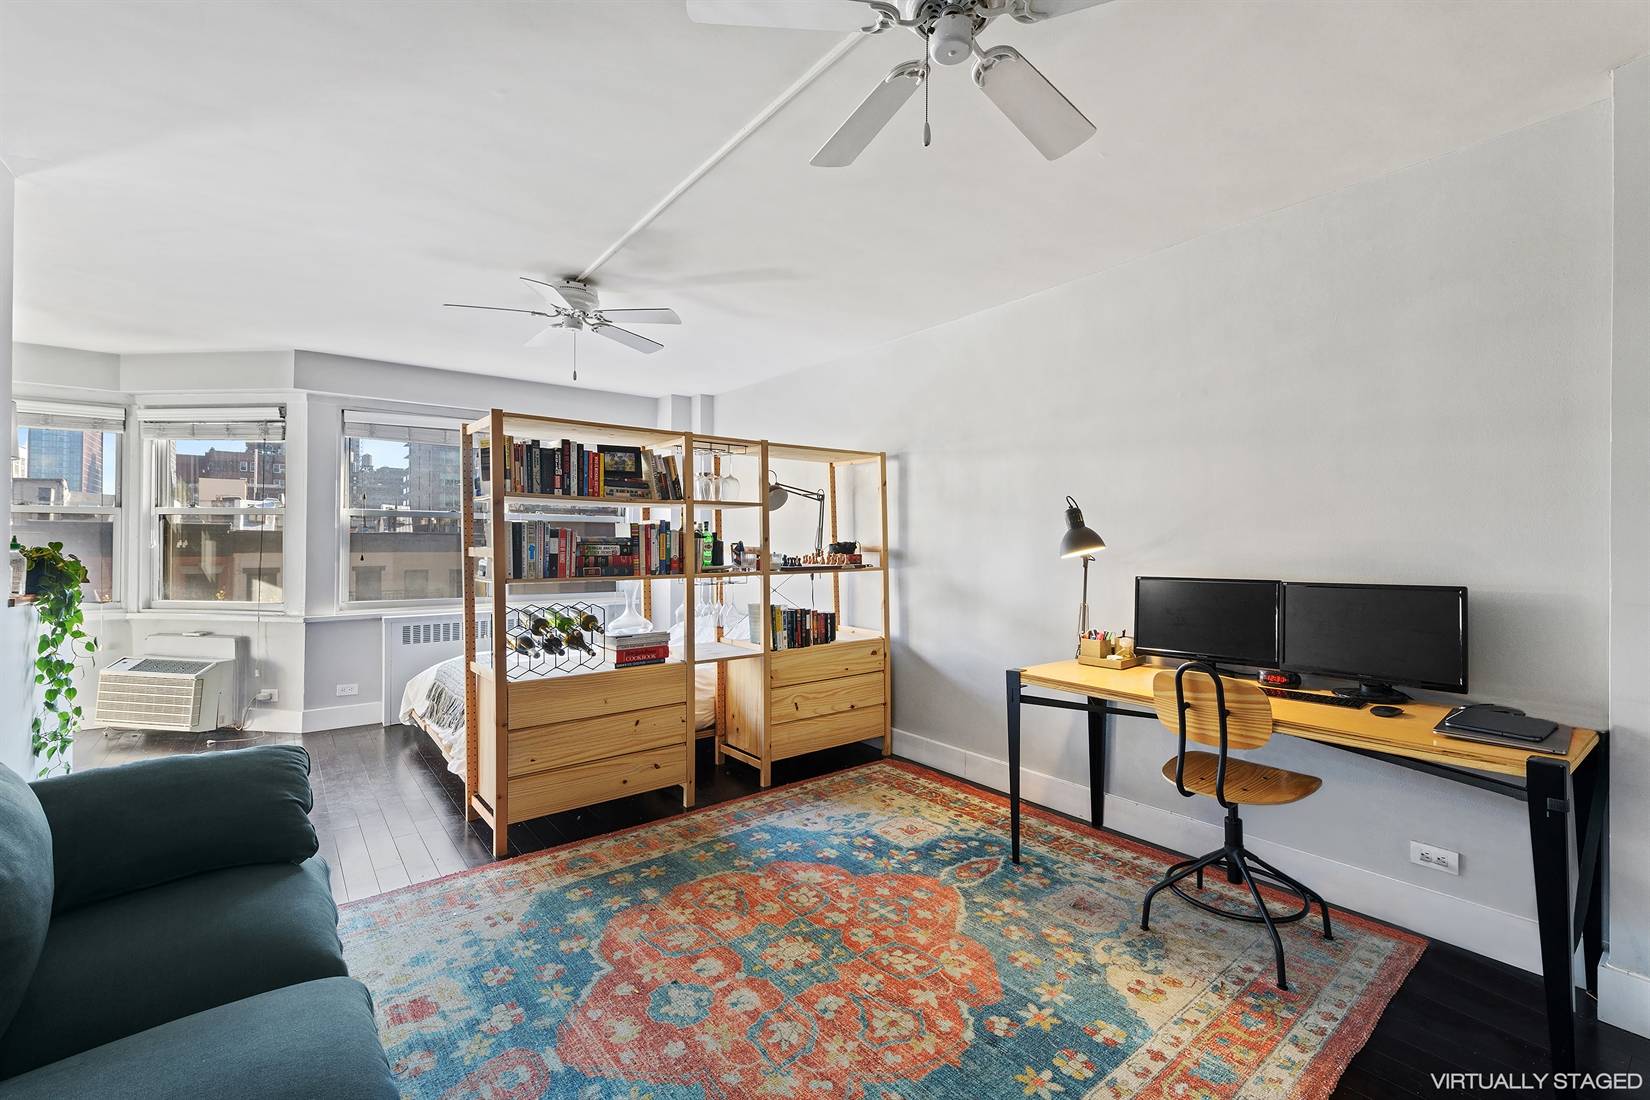 A fantastic buying opportunity, unit 6F at 166 East 35th Street is a spacious, updated and light filled alcove studio that enjoys open views from its eastern exposure.